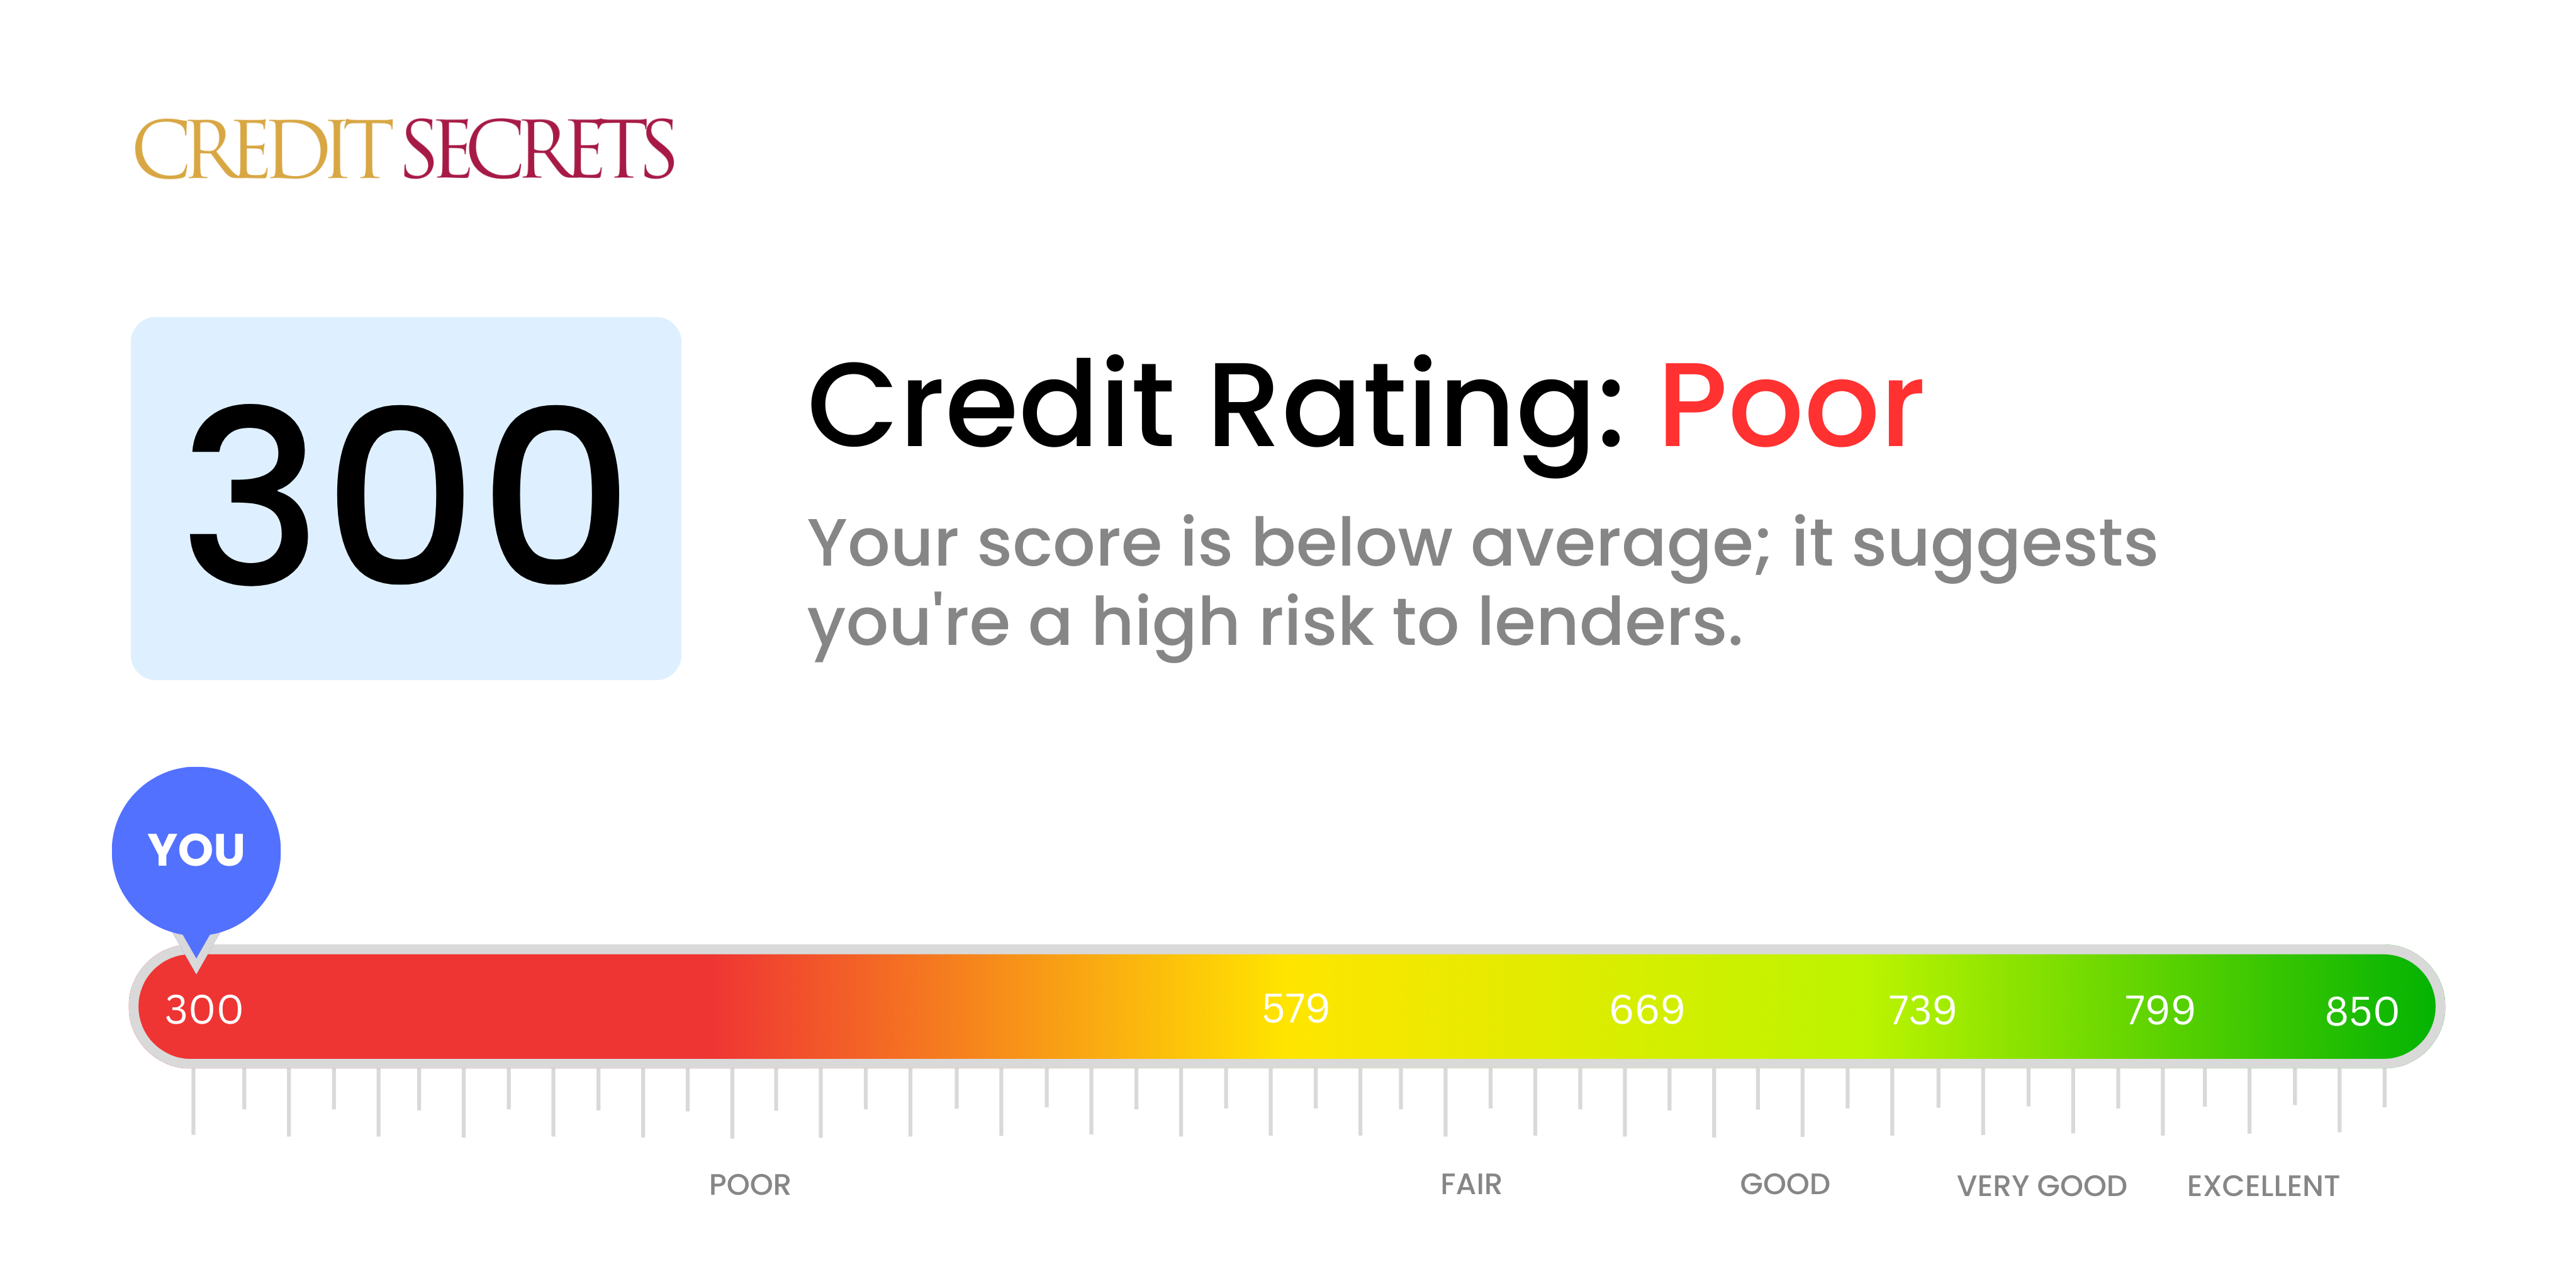 Is 300 a good credit score?